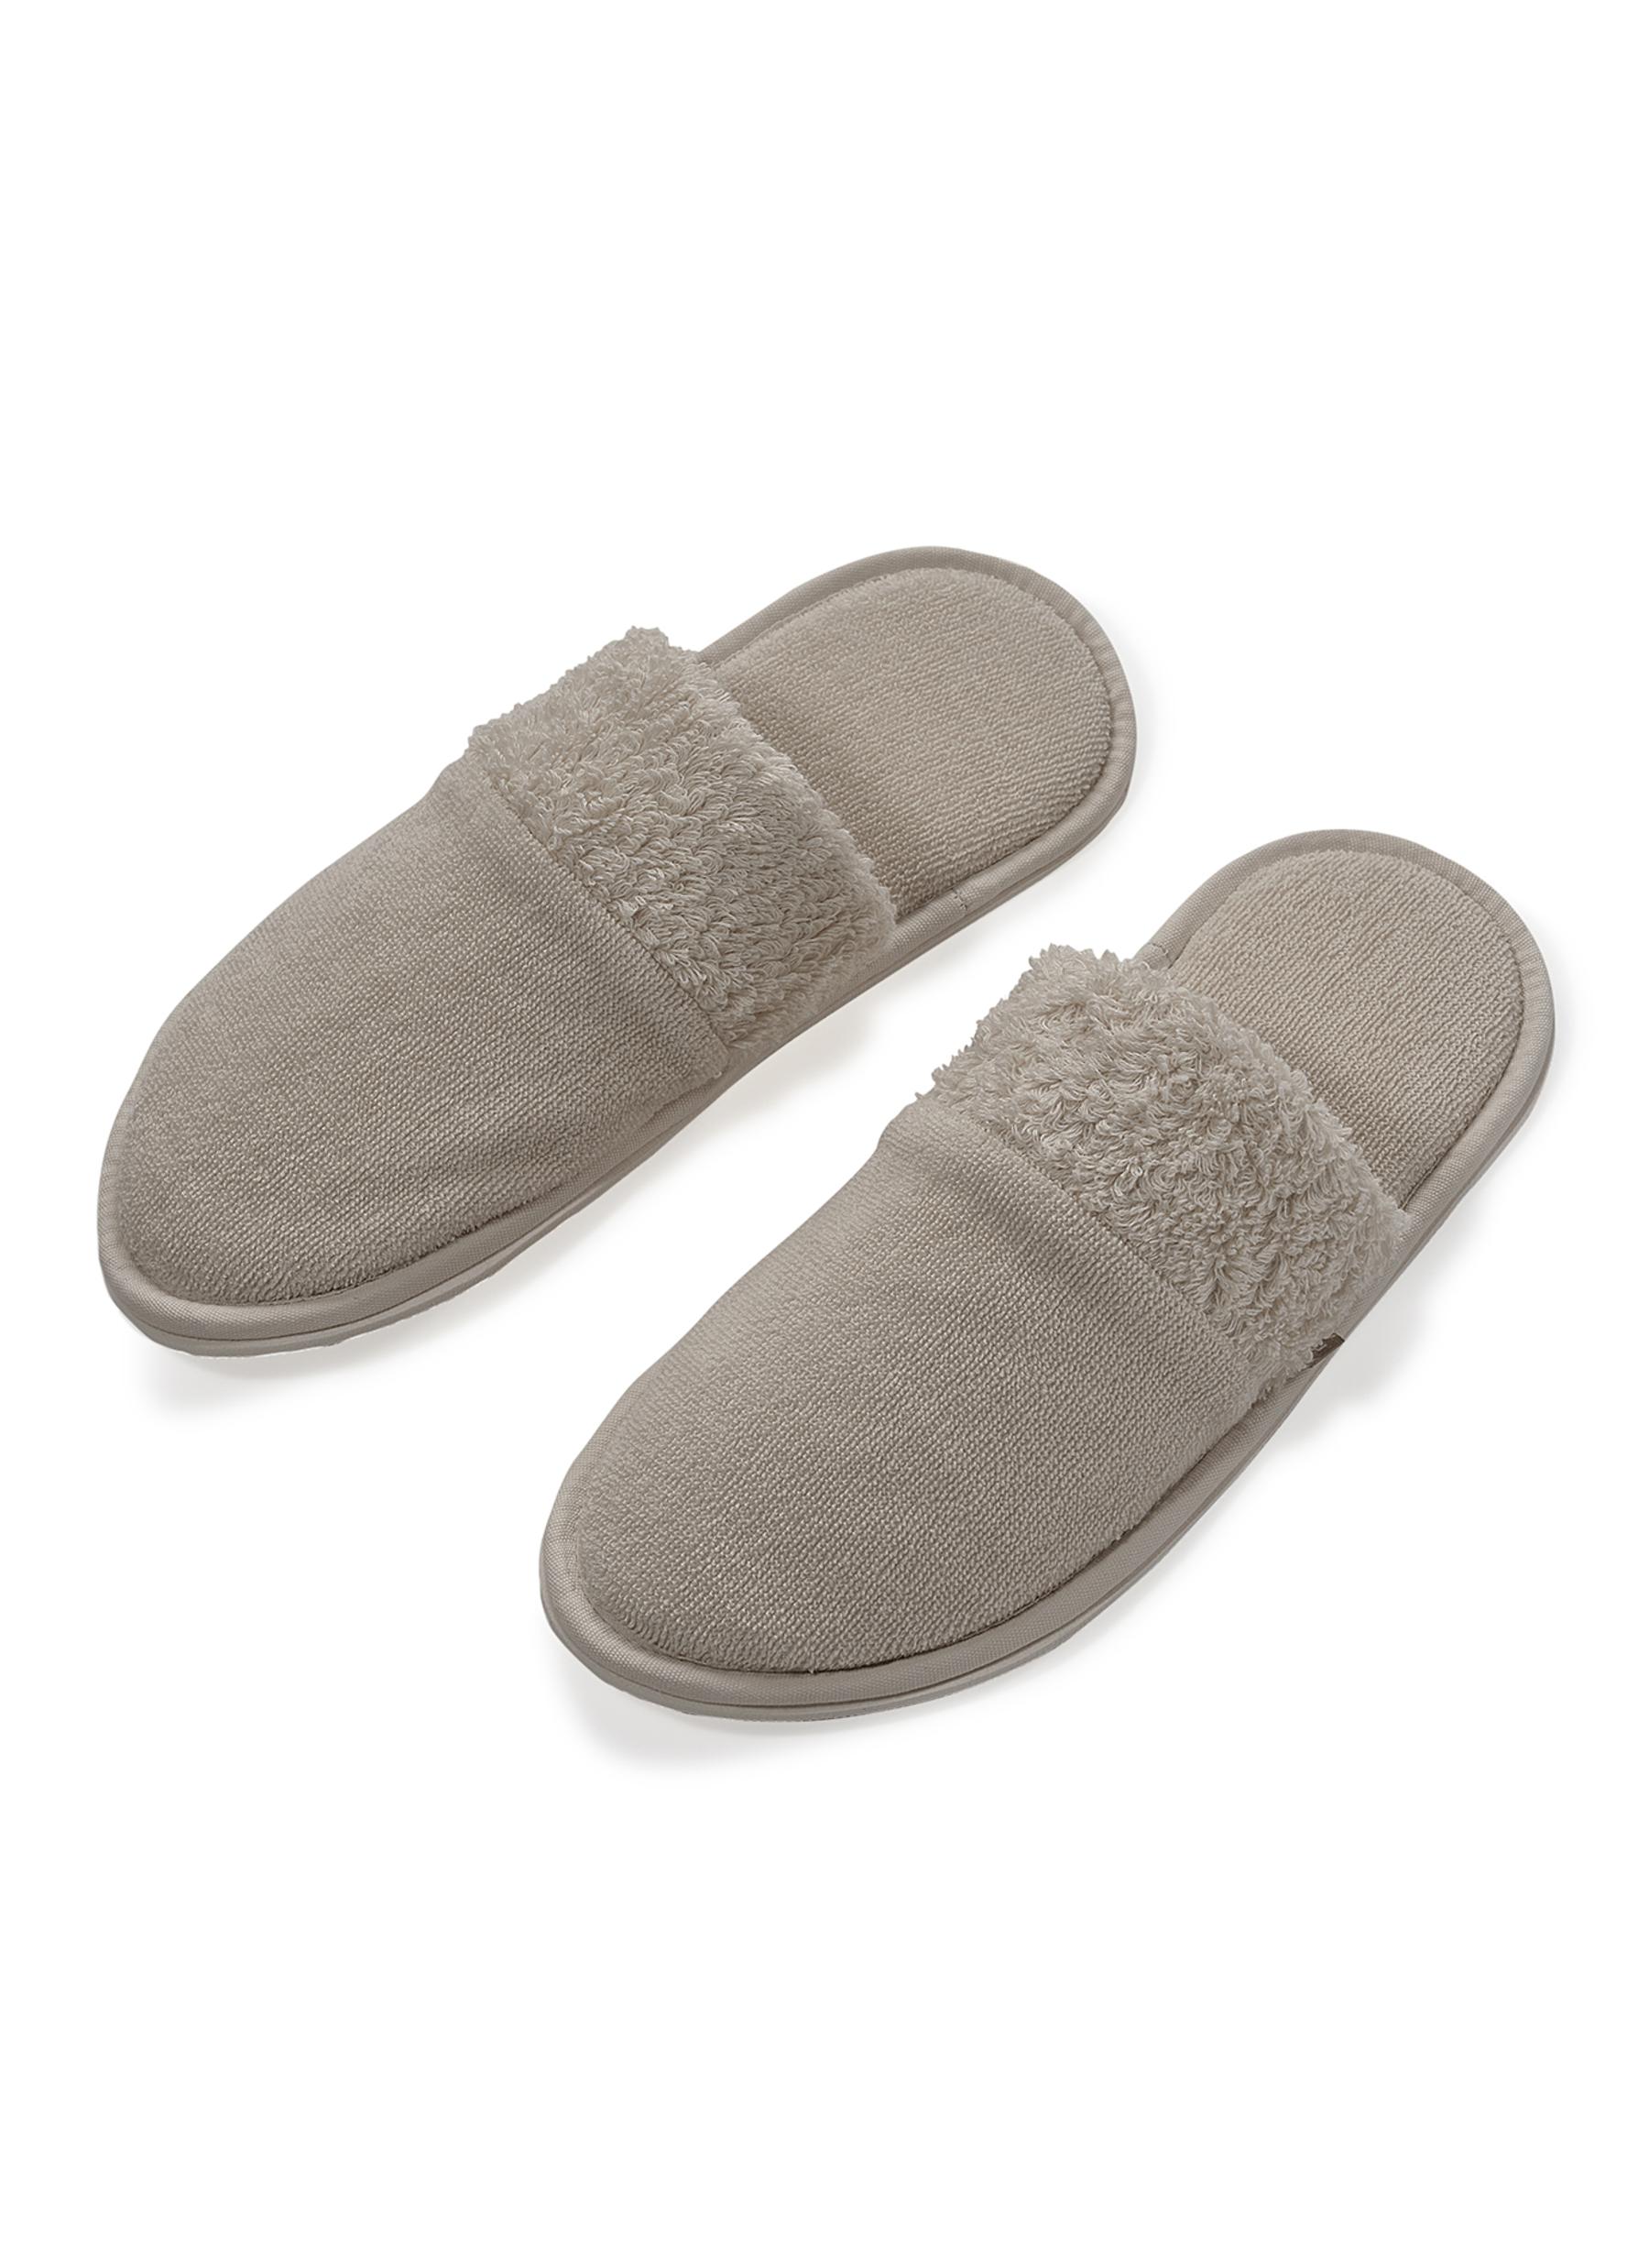 CHRISTINE EXTRA LARGE COTTON SLIPPERS - ATMOSPHERE